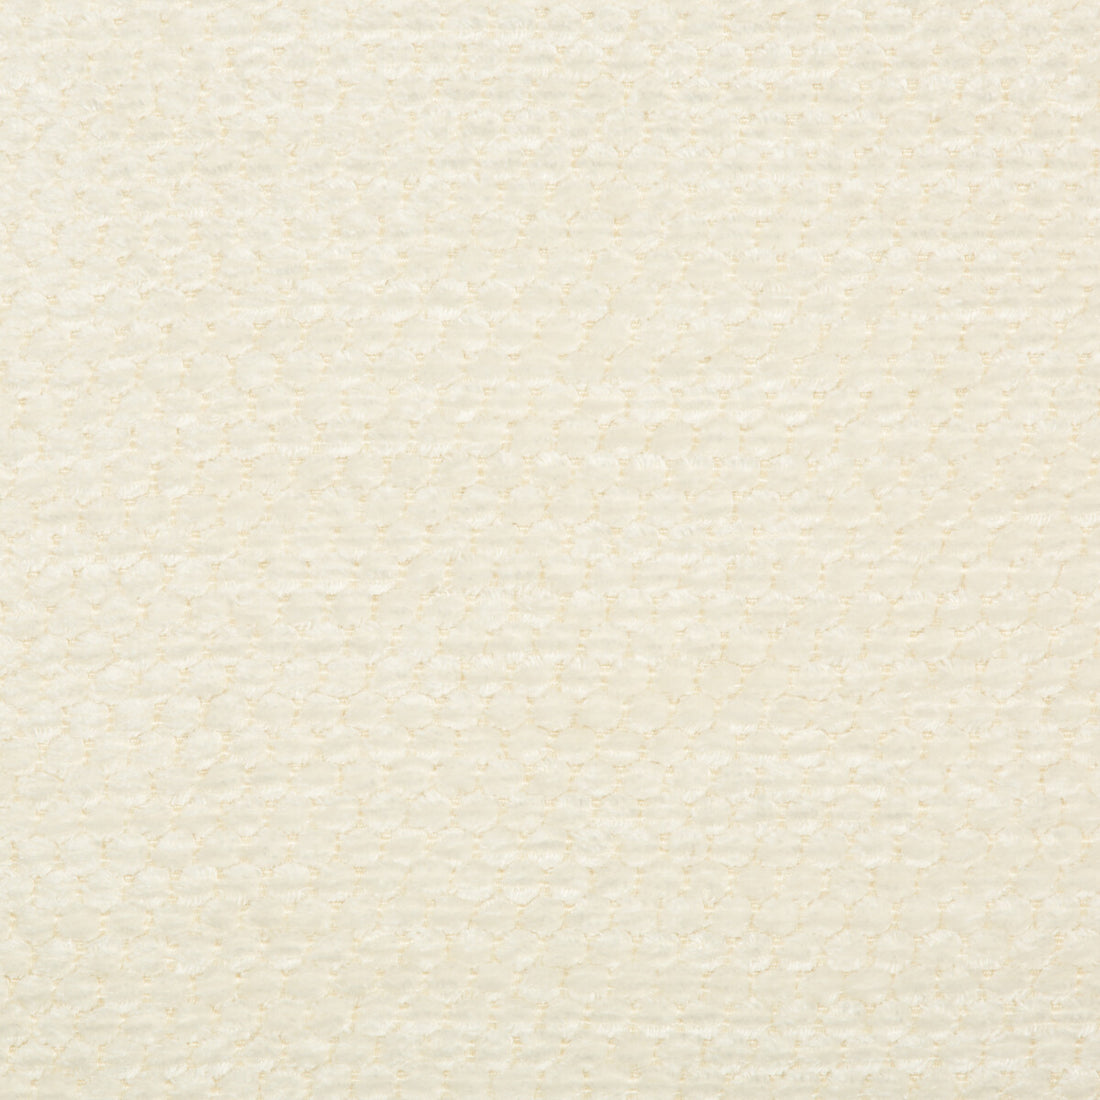 Lonsdale fabric in ivory color - pattern 2016125.101.0 - by Lee Jofa in the Furness Weaves collection